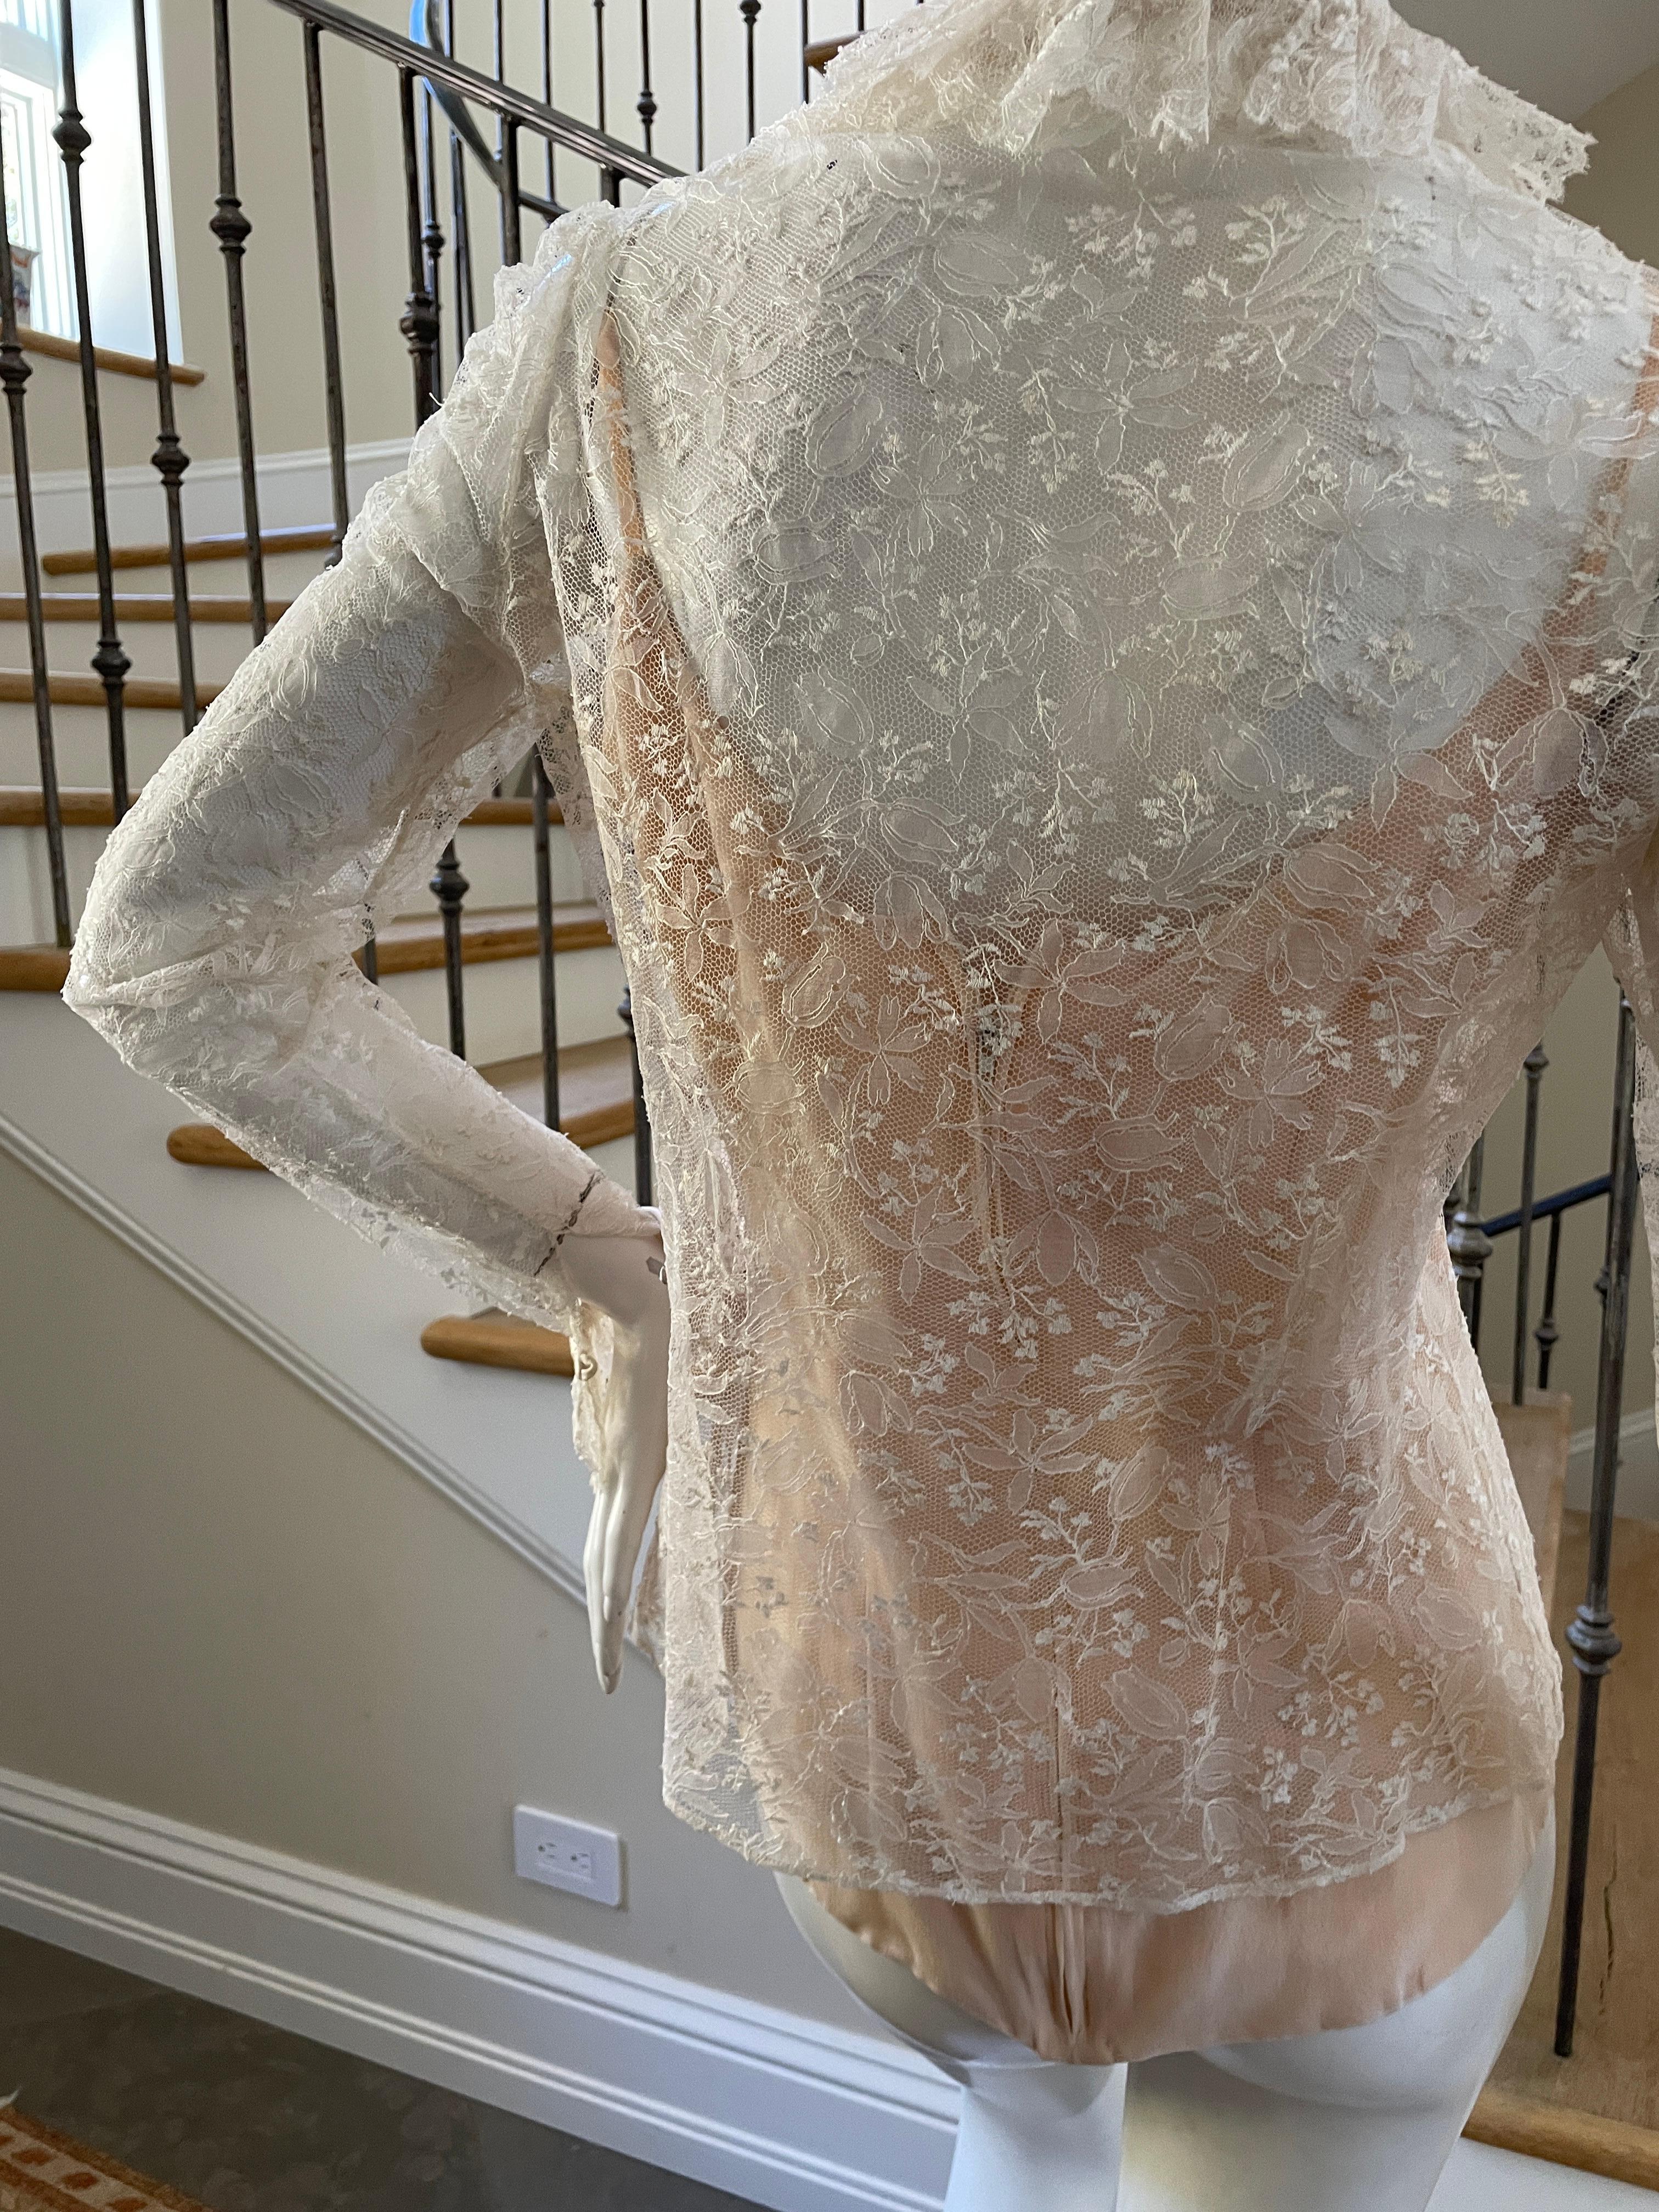 Jean-Louis Couture 1960's Sheer Lace Blouse with Ruffle Collar and Cuffs For Sale 3